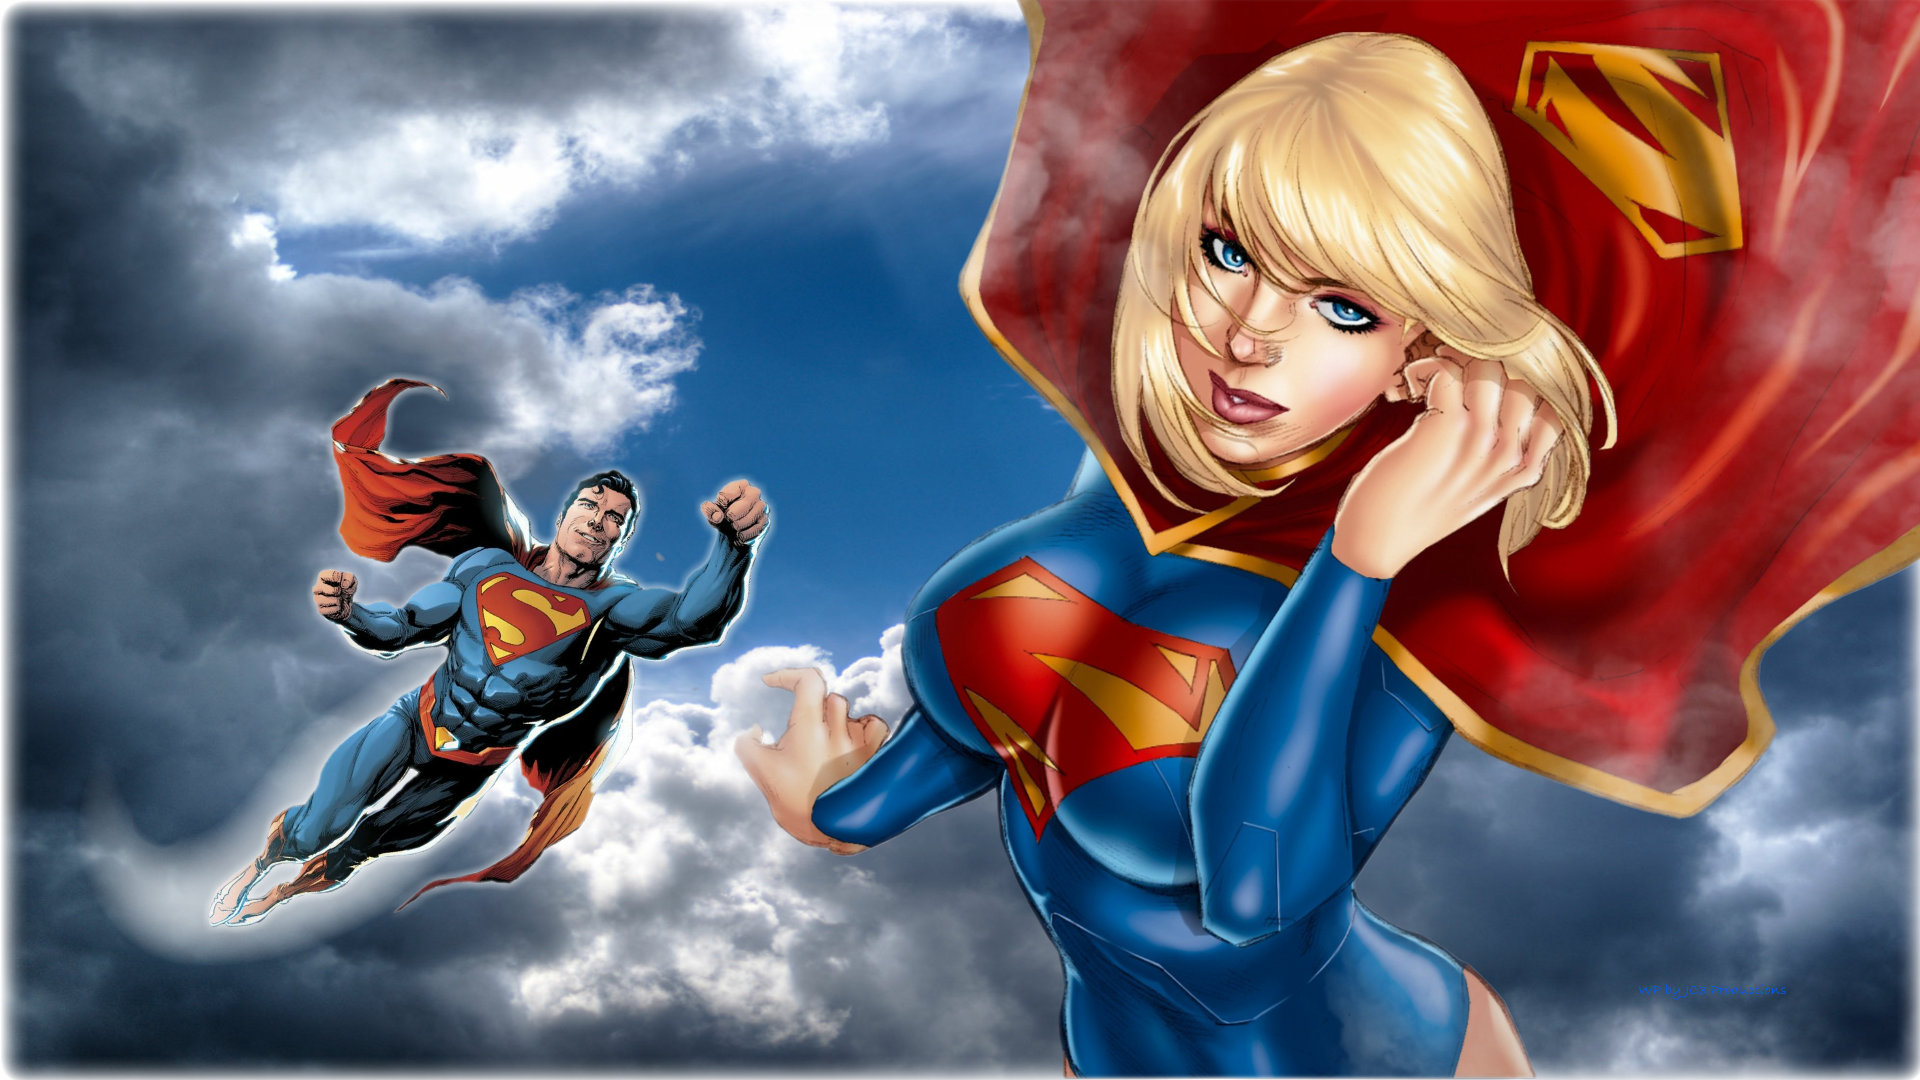 Superman Supergirl In The Clouds - Superman And Supergirl Comics - HD Wallpaper 